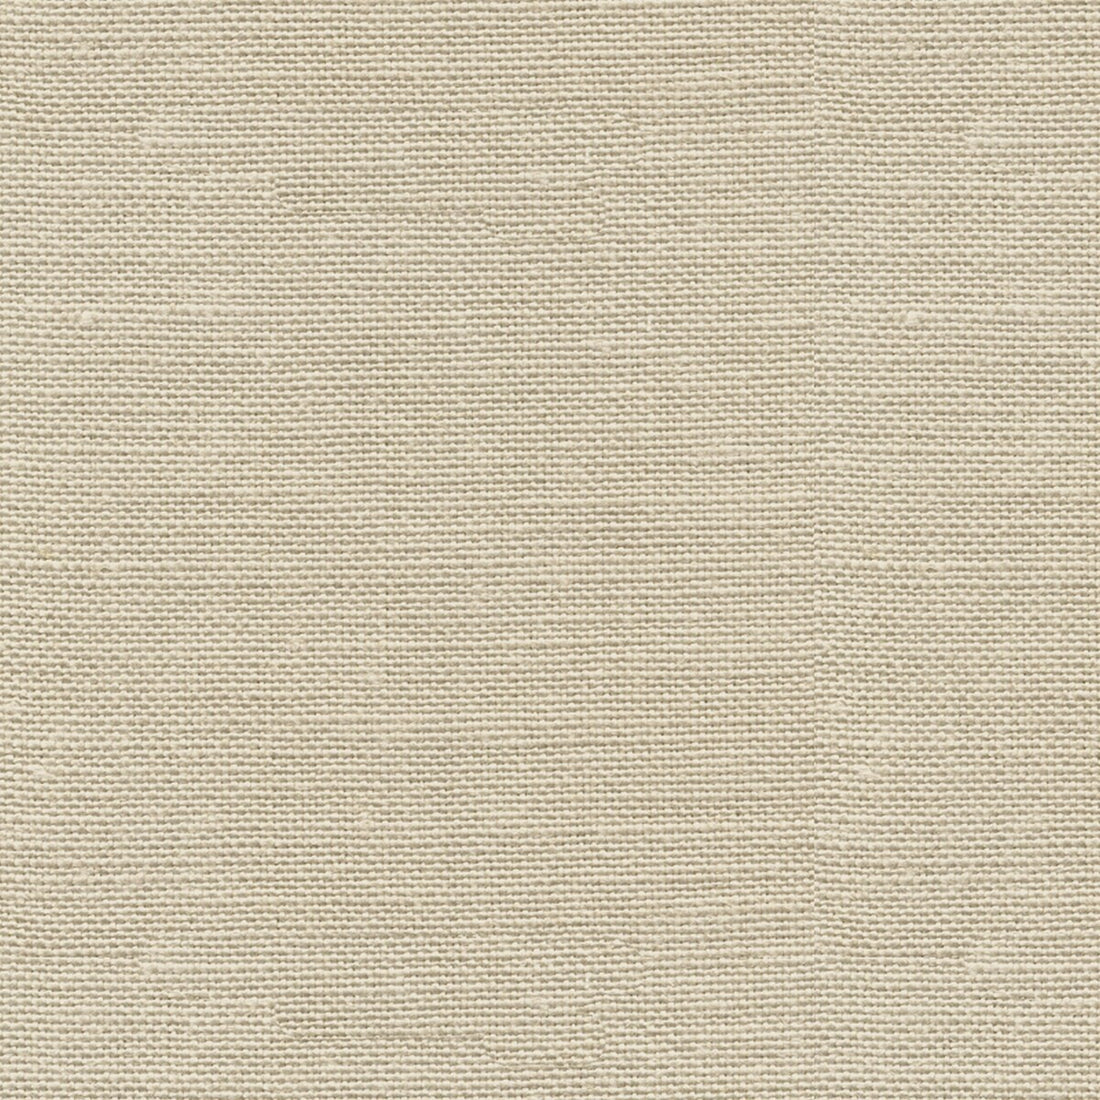 Lea fabric in stone color - pattern LEA.SANDSTO.0 - by G P &amp; J Baker in the Crayford collection